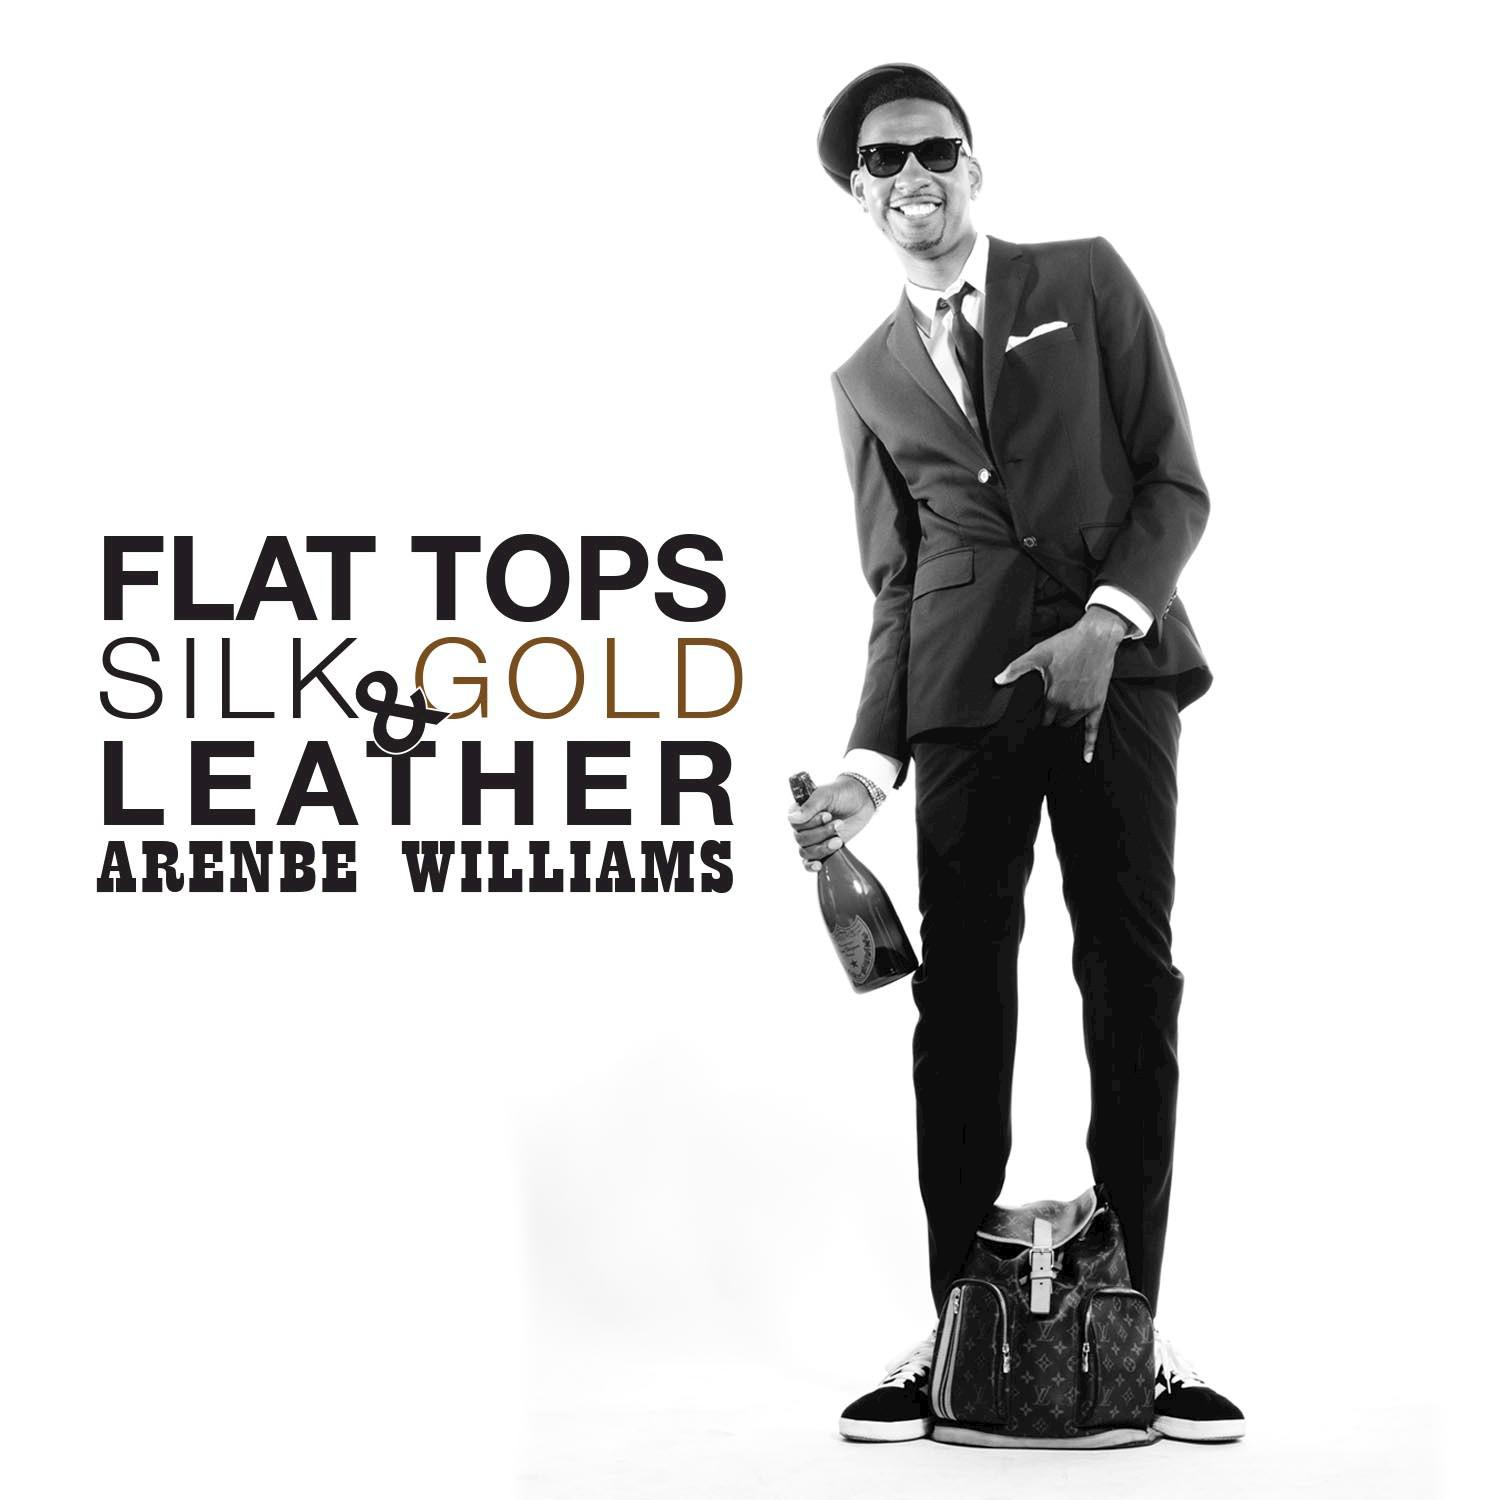 Flat Tops Silk Gold & Leather